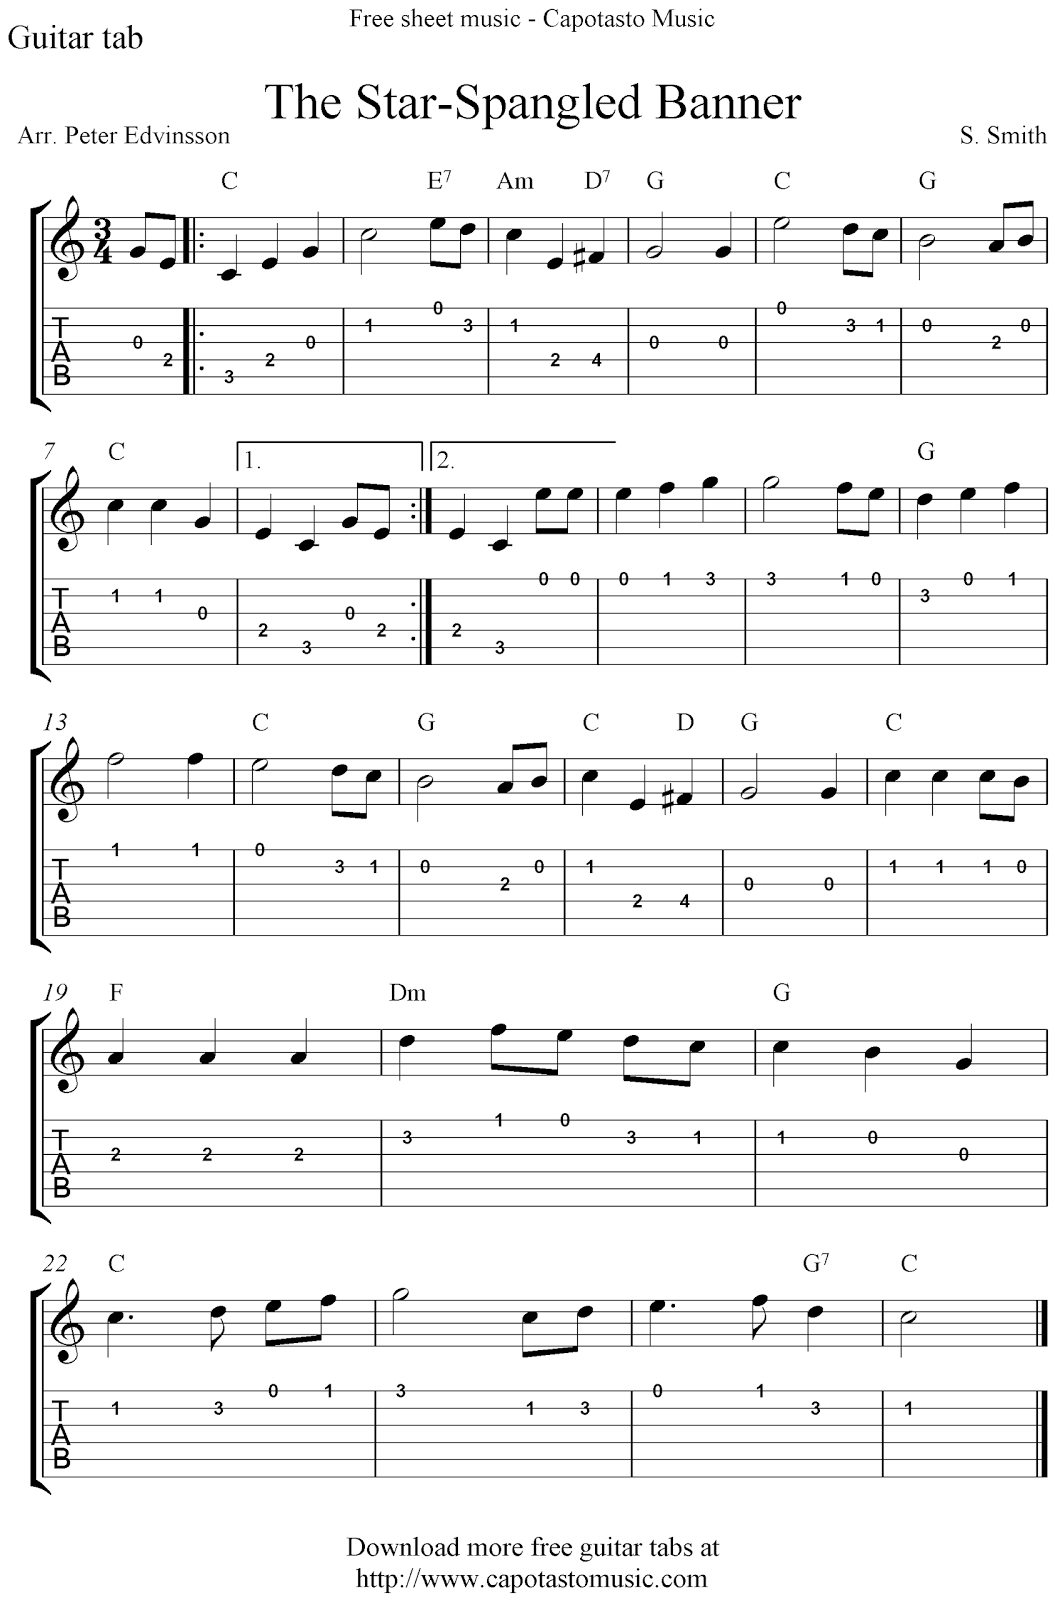 Easy Guitar Tab Sheet Music Score With The Melody The Star-Spangled - Free Printable Guitar Music